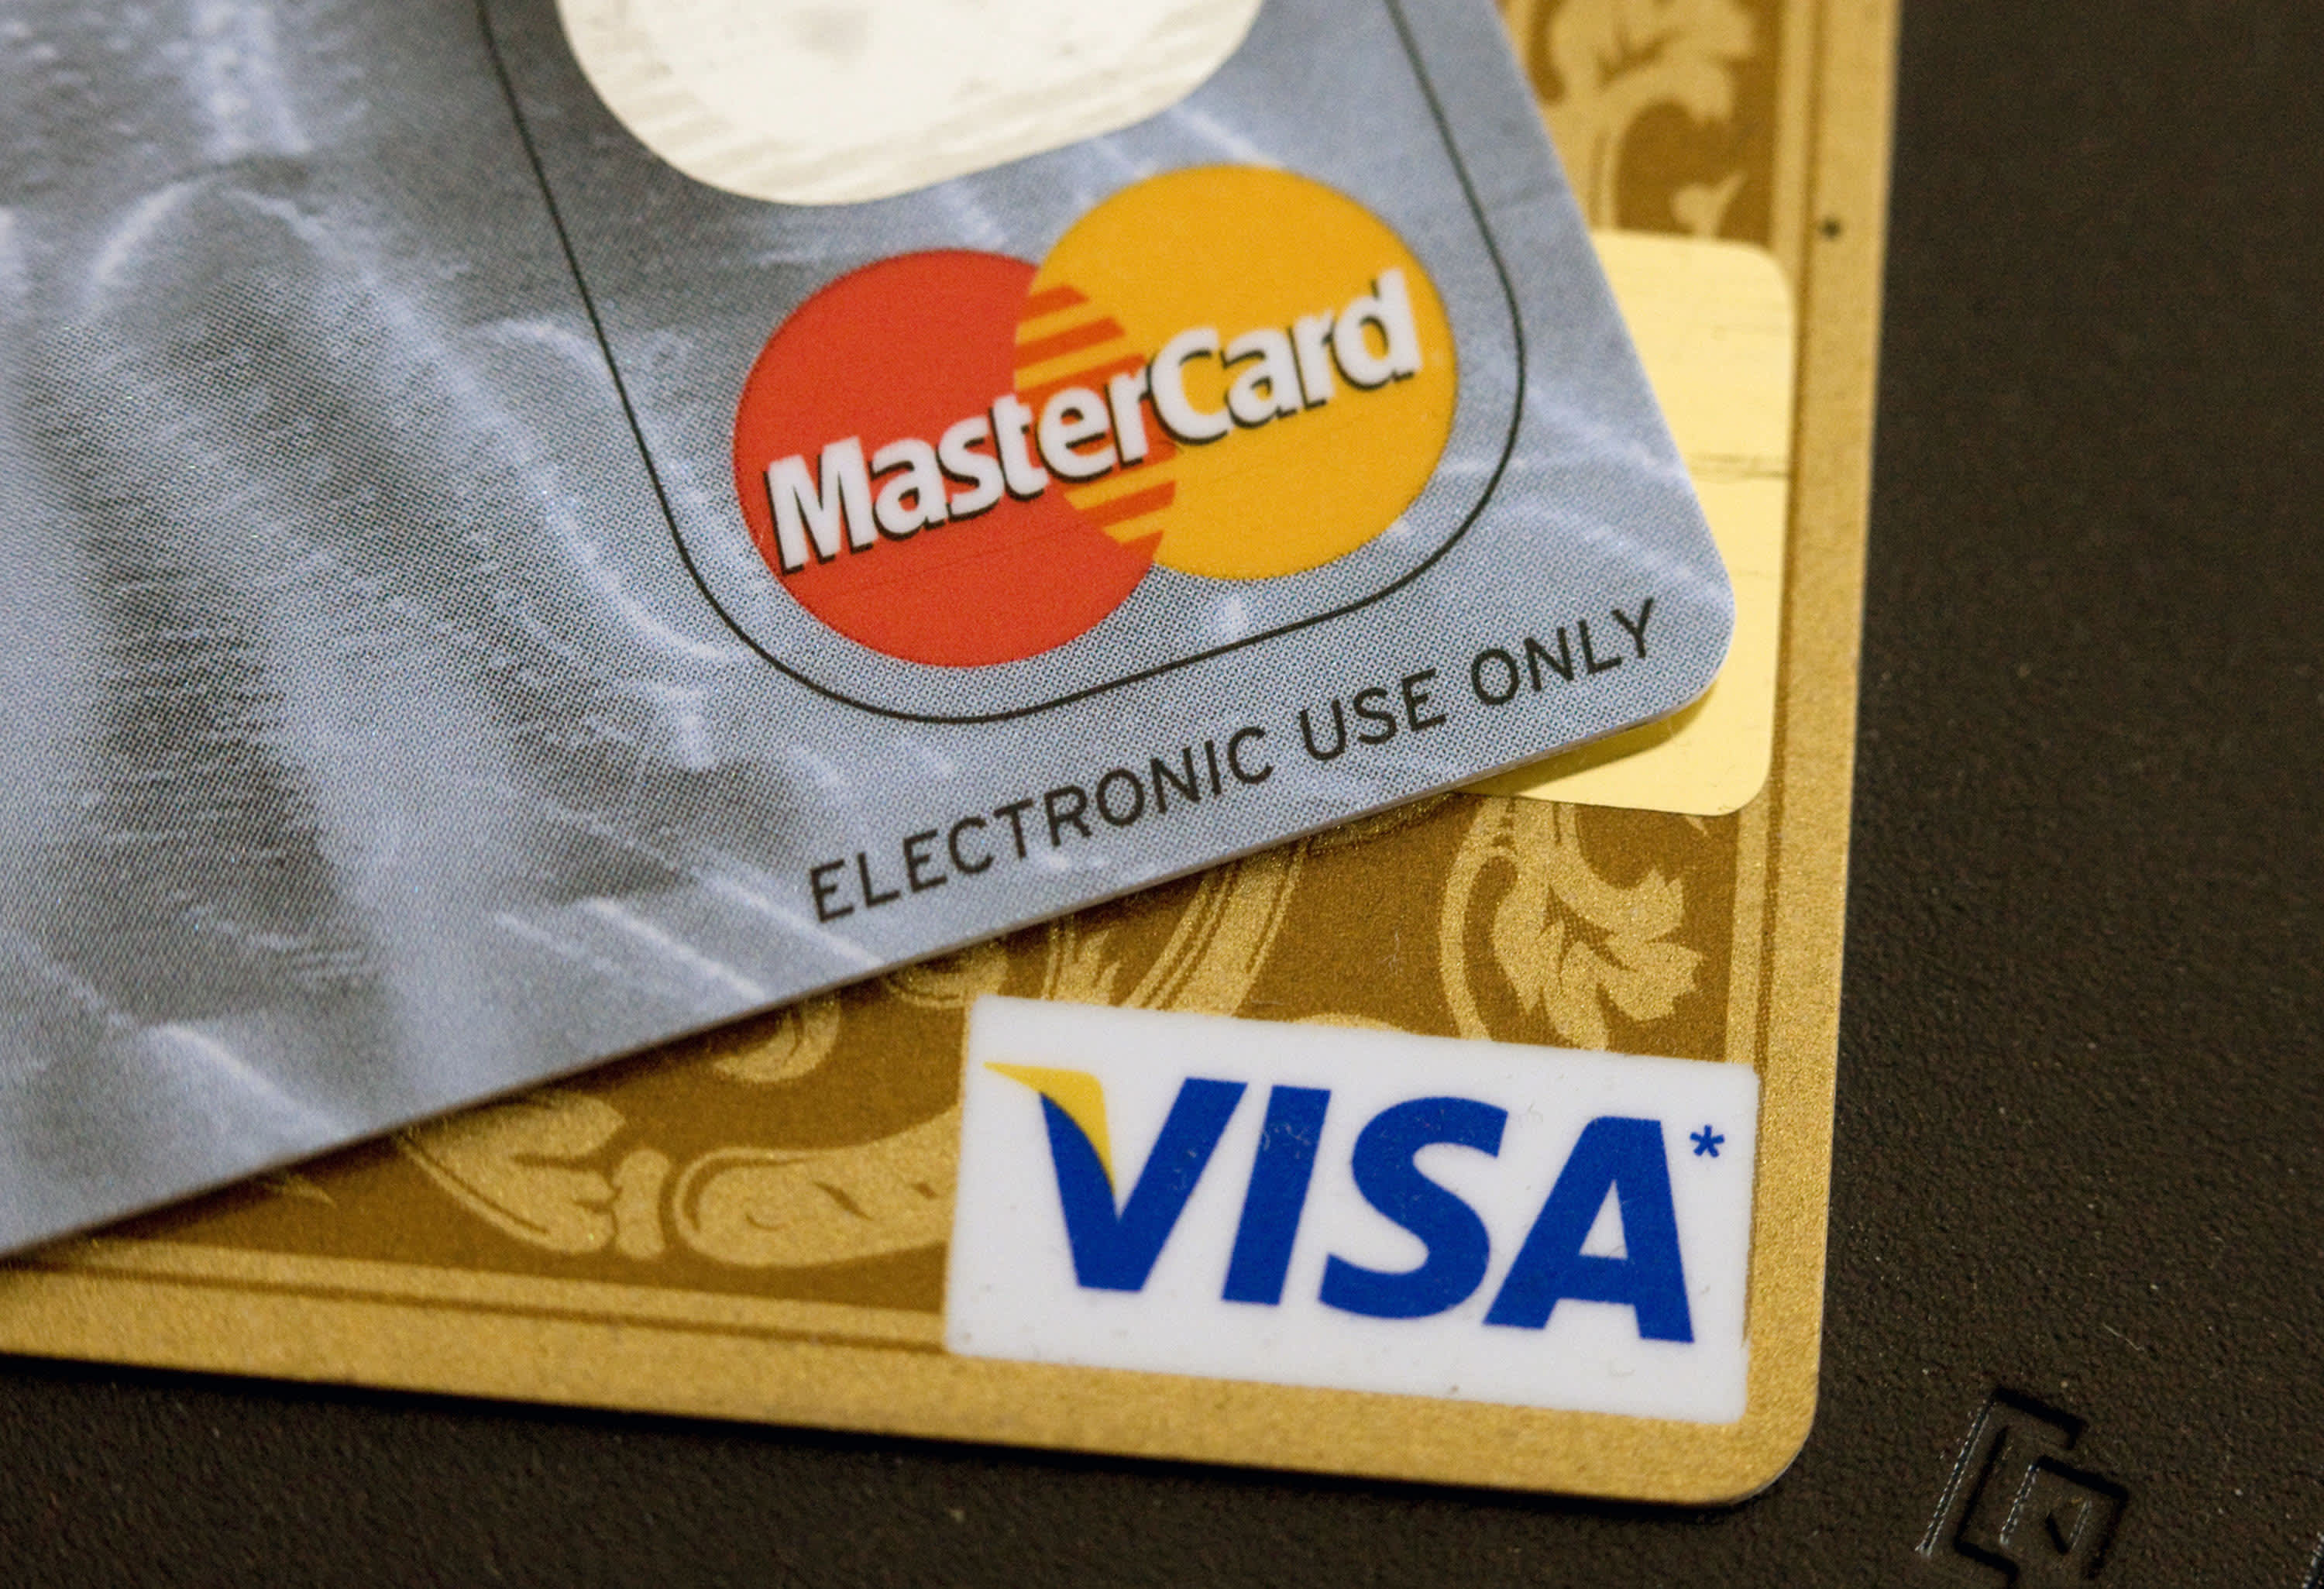 mastercard-posts-earnings-of-7-27-a-share-vs-6-94-estimate